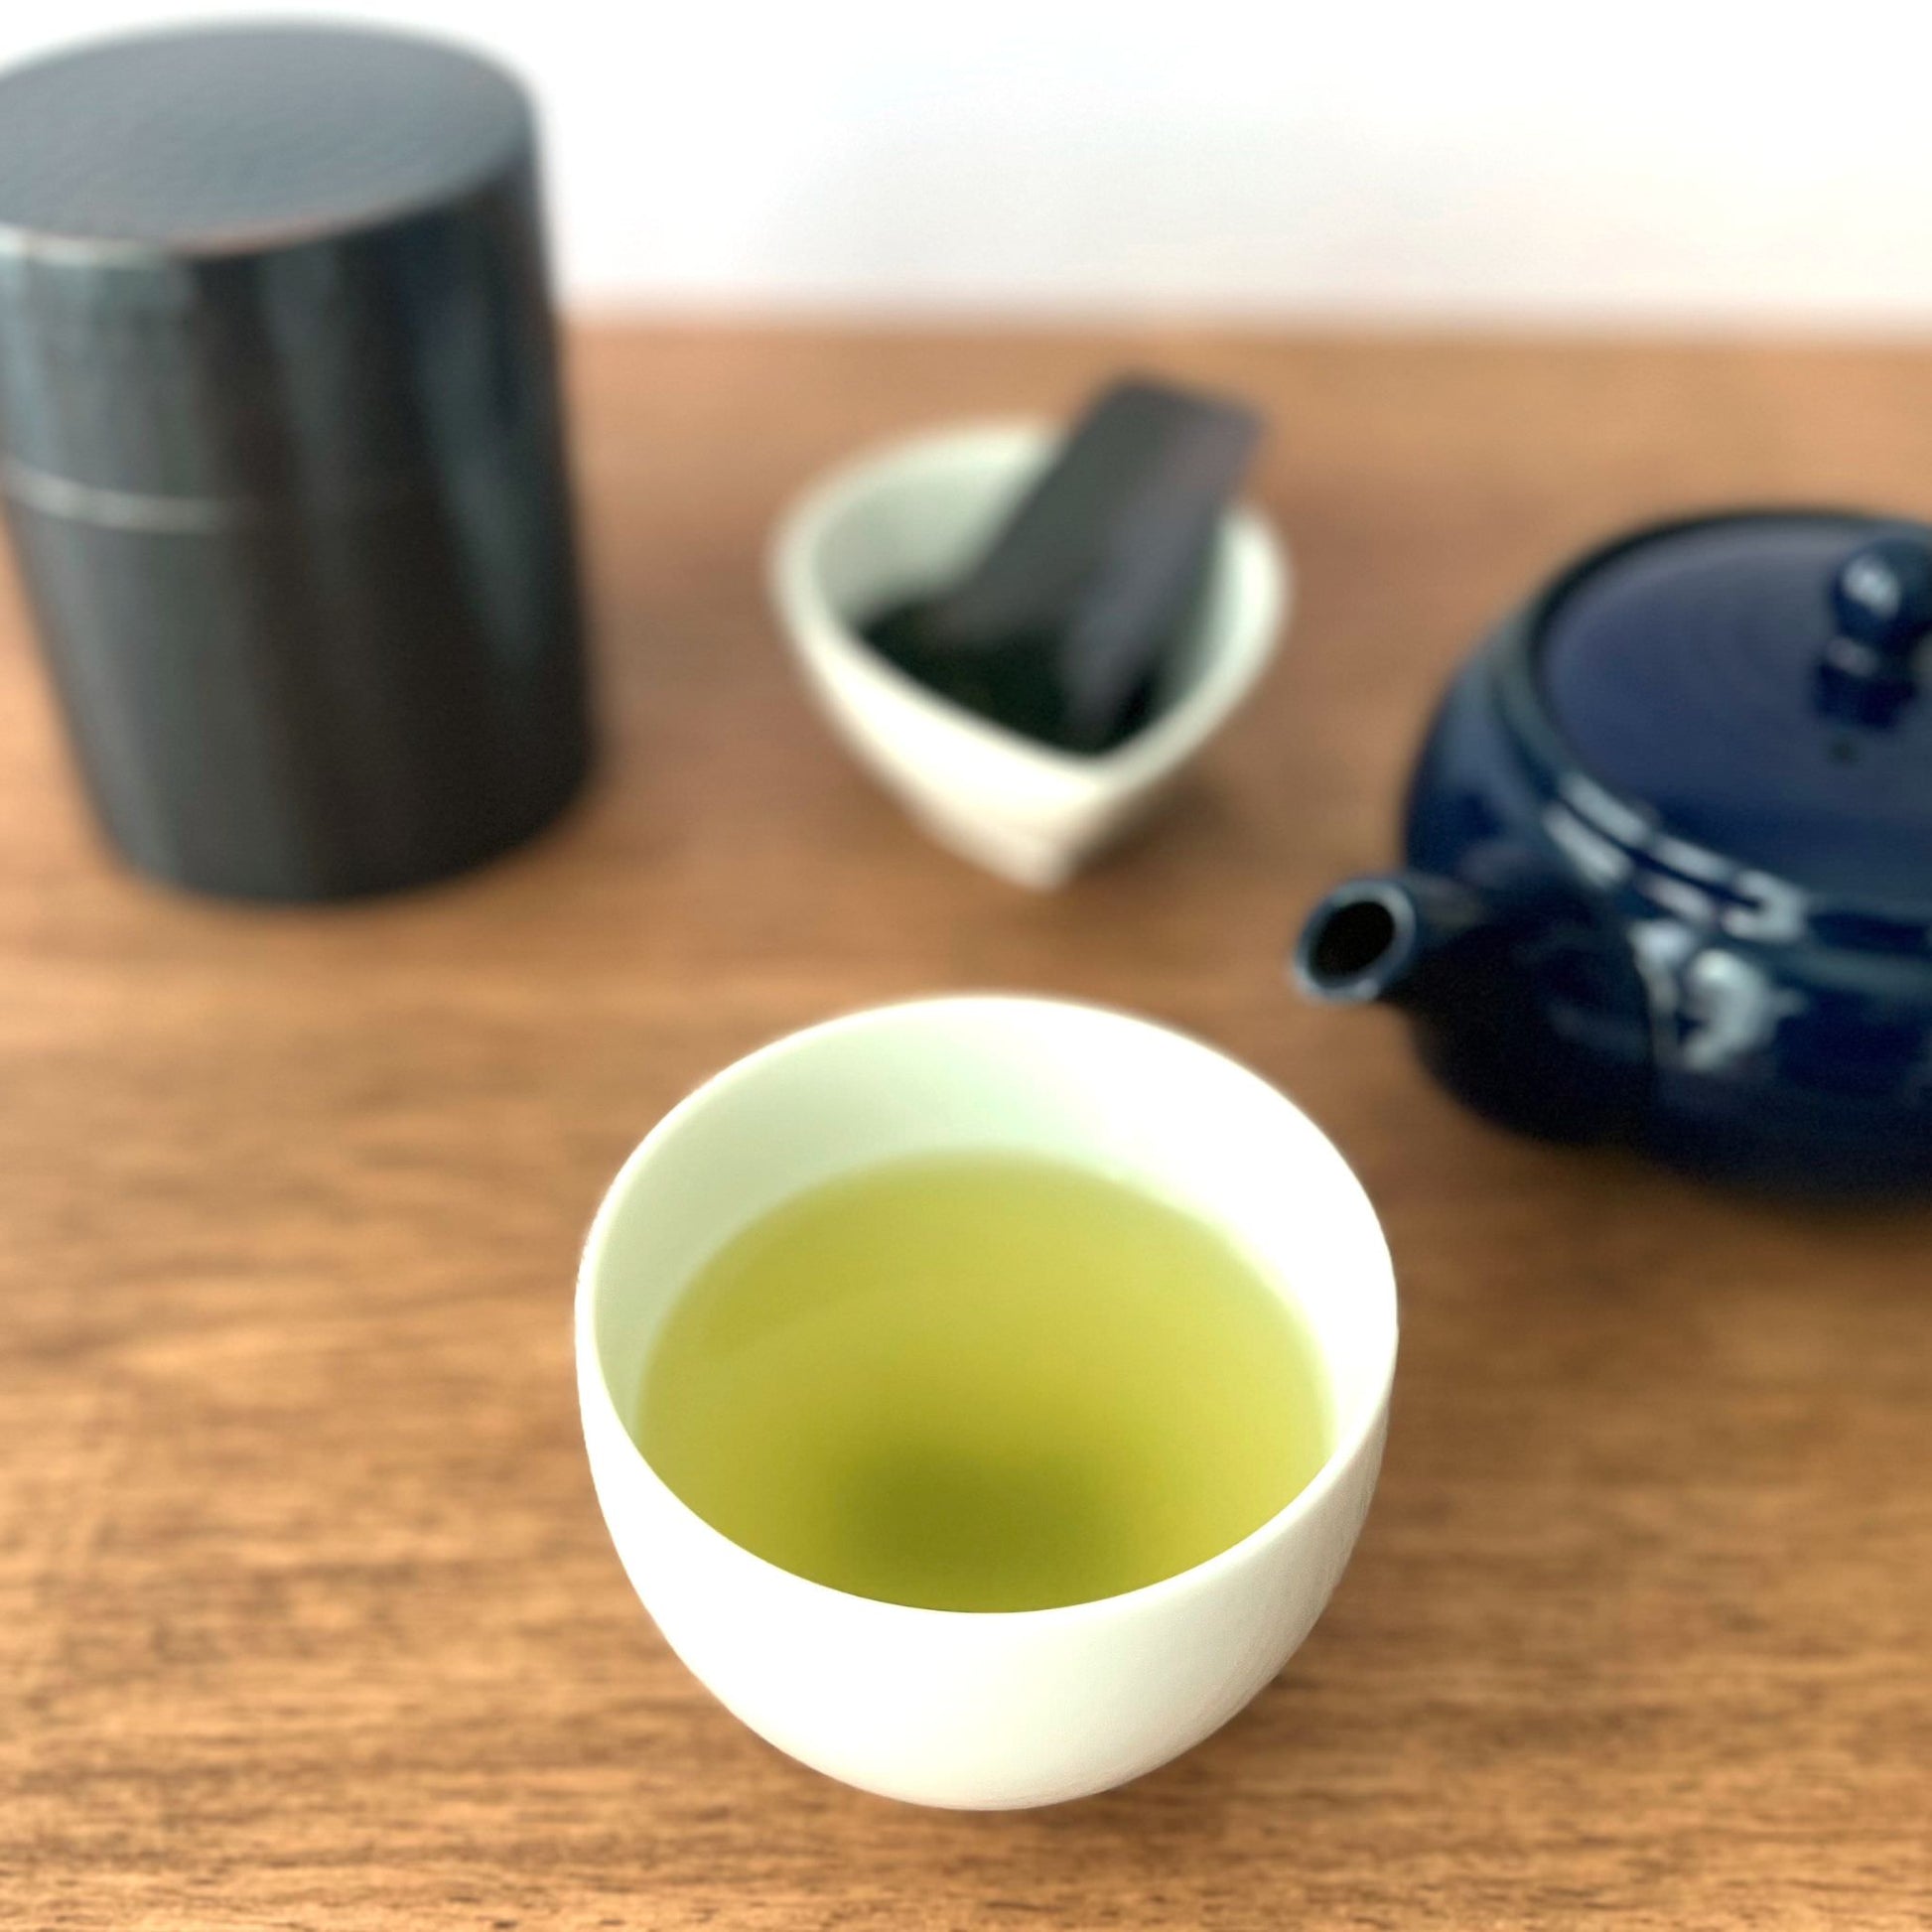 The water color of the EGCG green tea. The tea is loaded with natural catechin content.